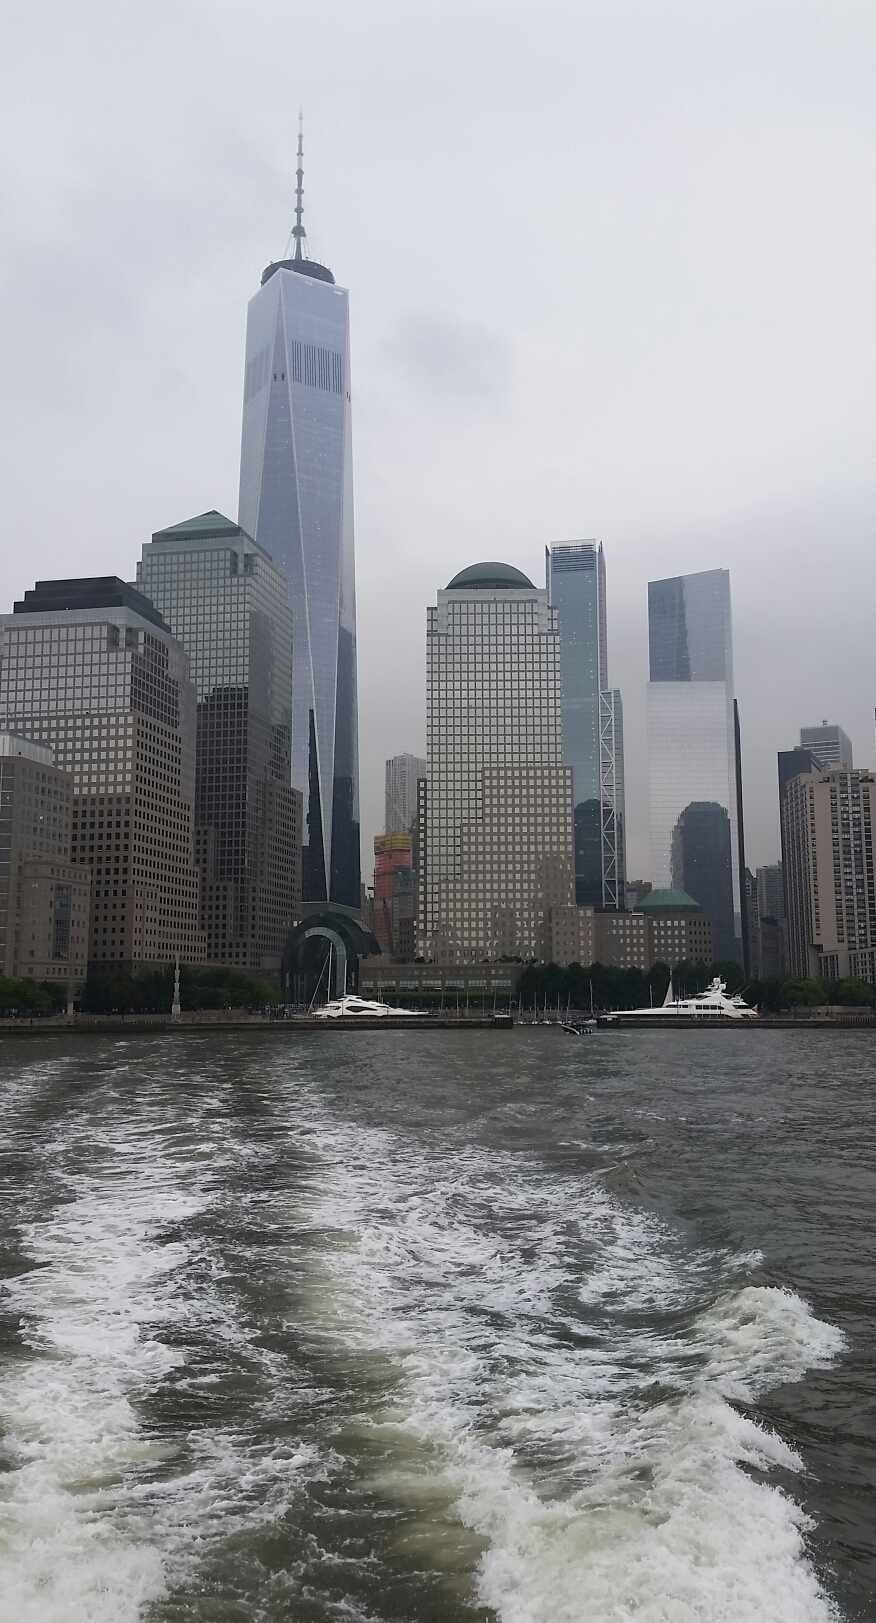 NYC on a cloudy day